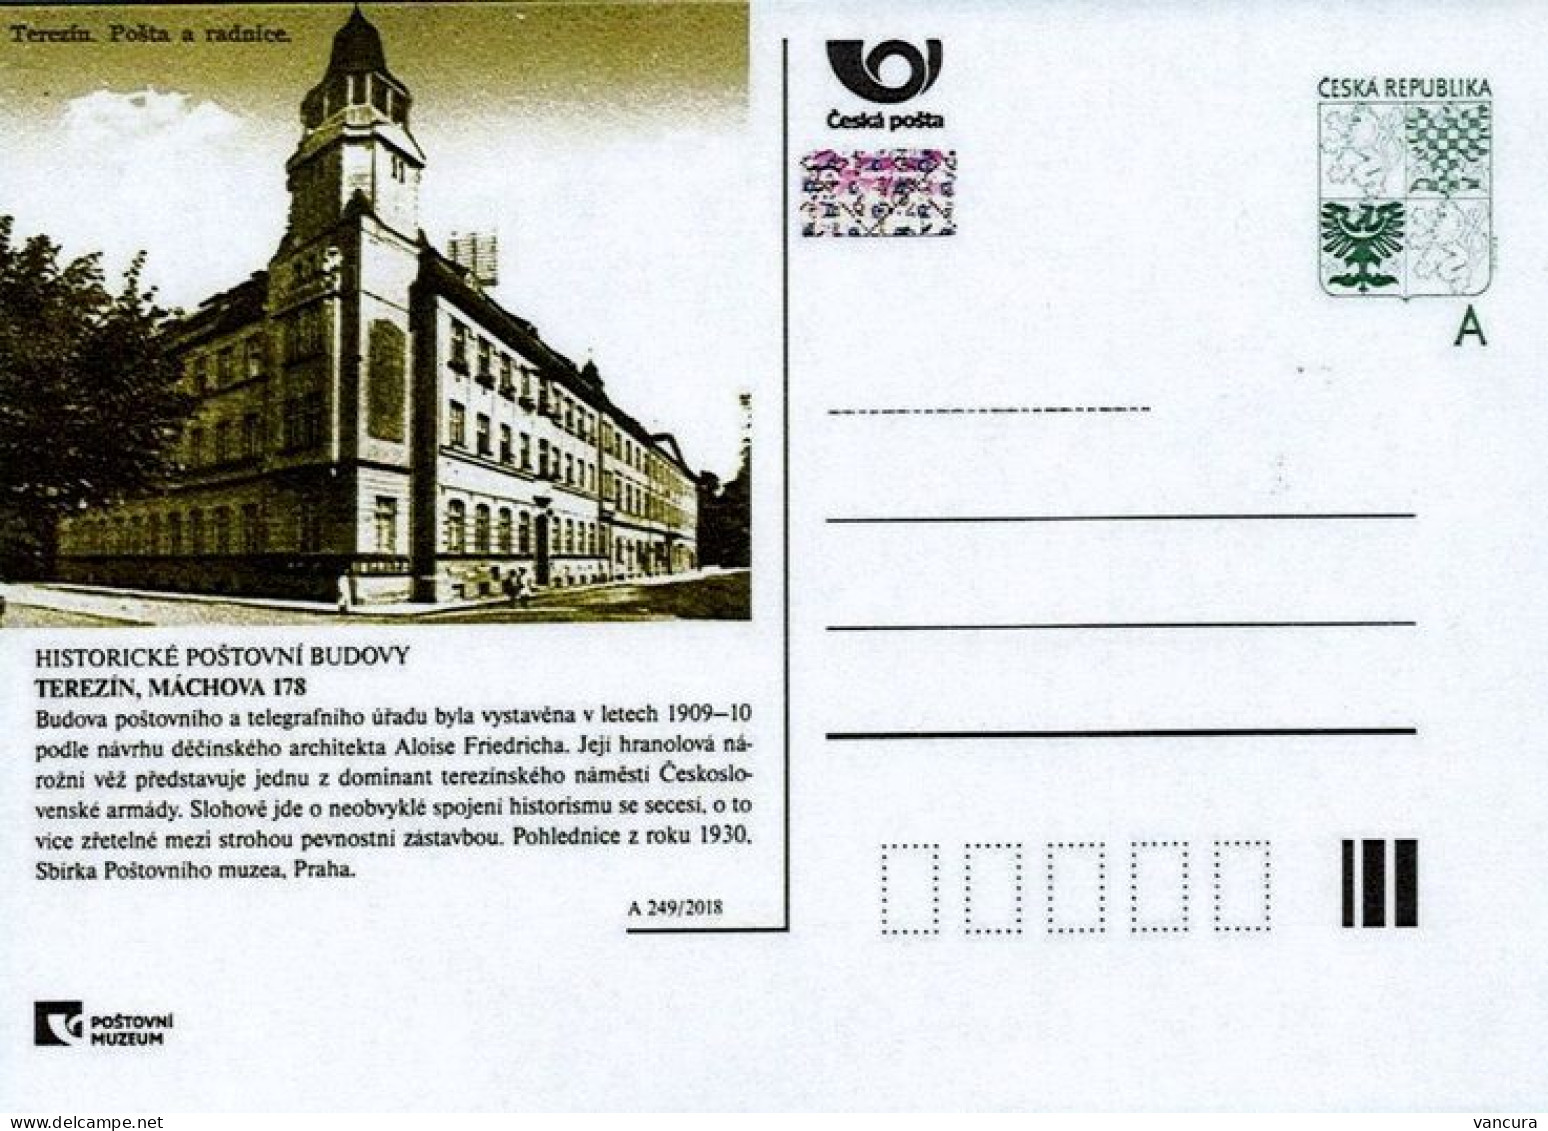 CDV 180 A Czech Republic Historical Postal Buildings 2018 Theresienstadt postoffice and 7 more